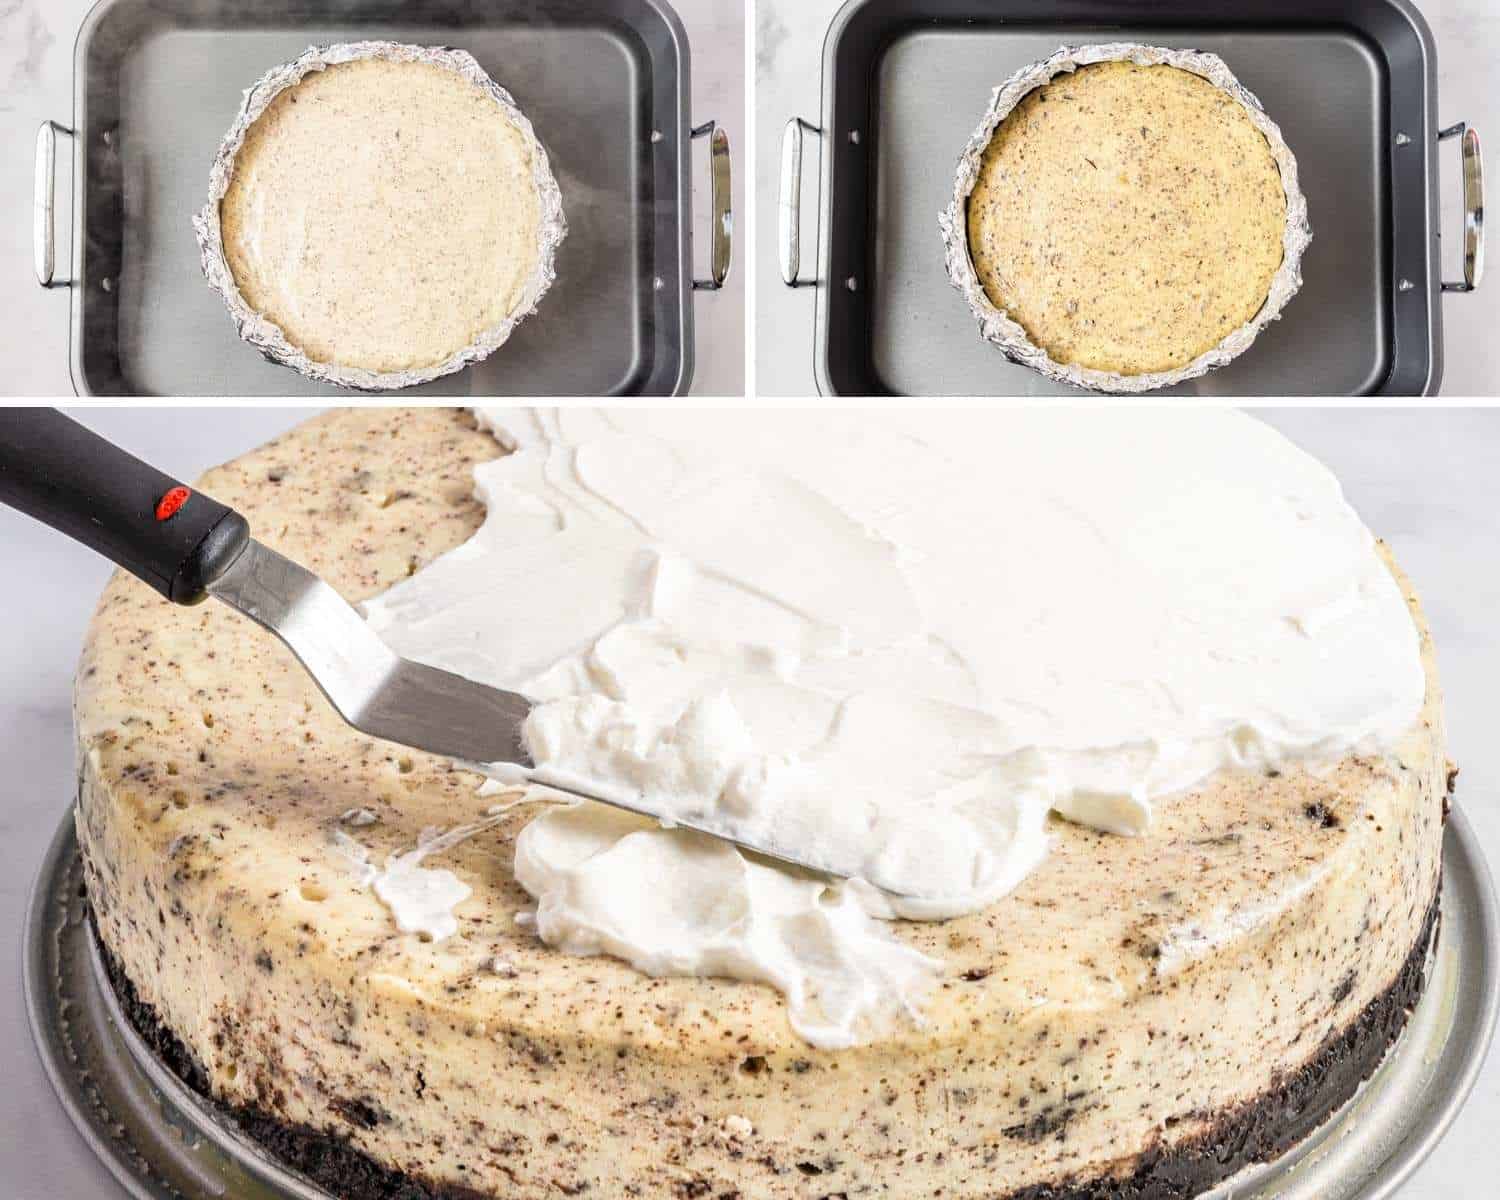 How to bake an oreo cheesecake and apply a layer of whipped topping